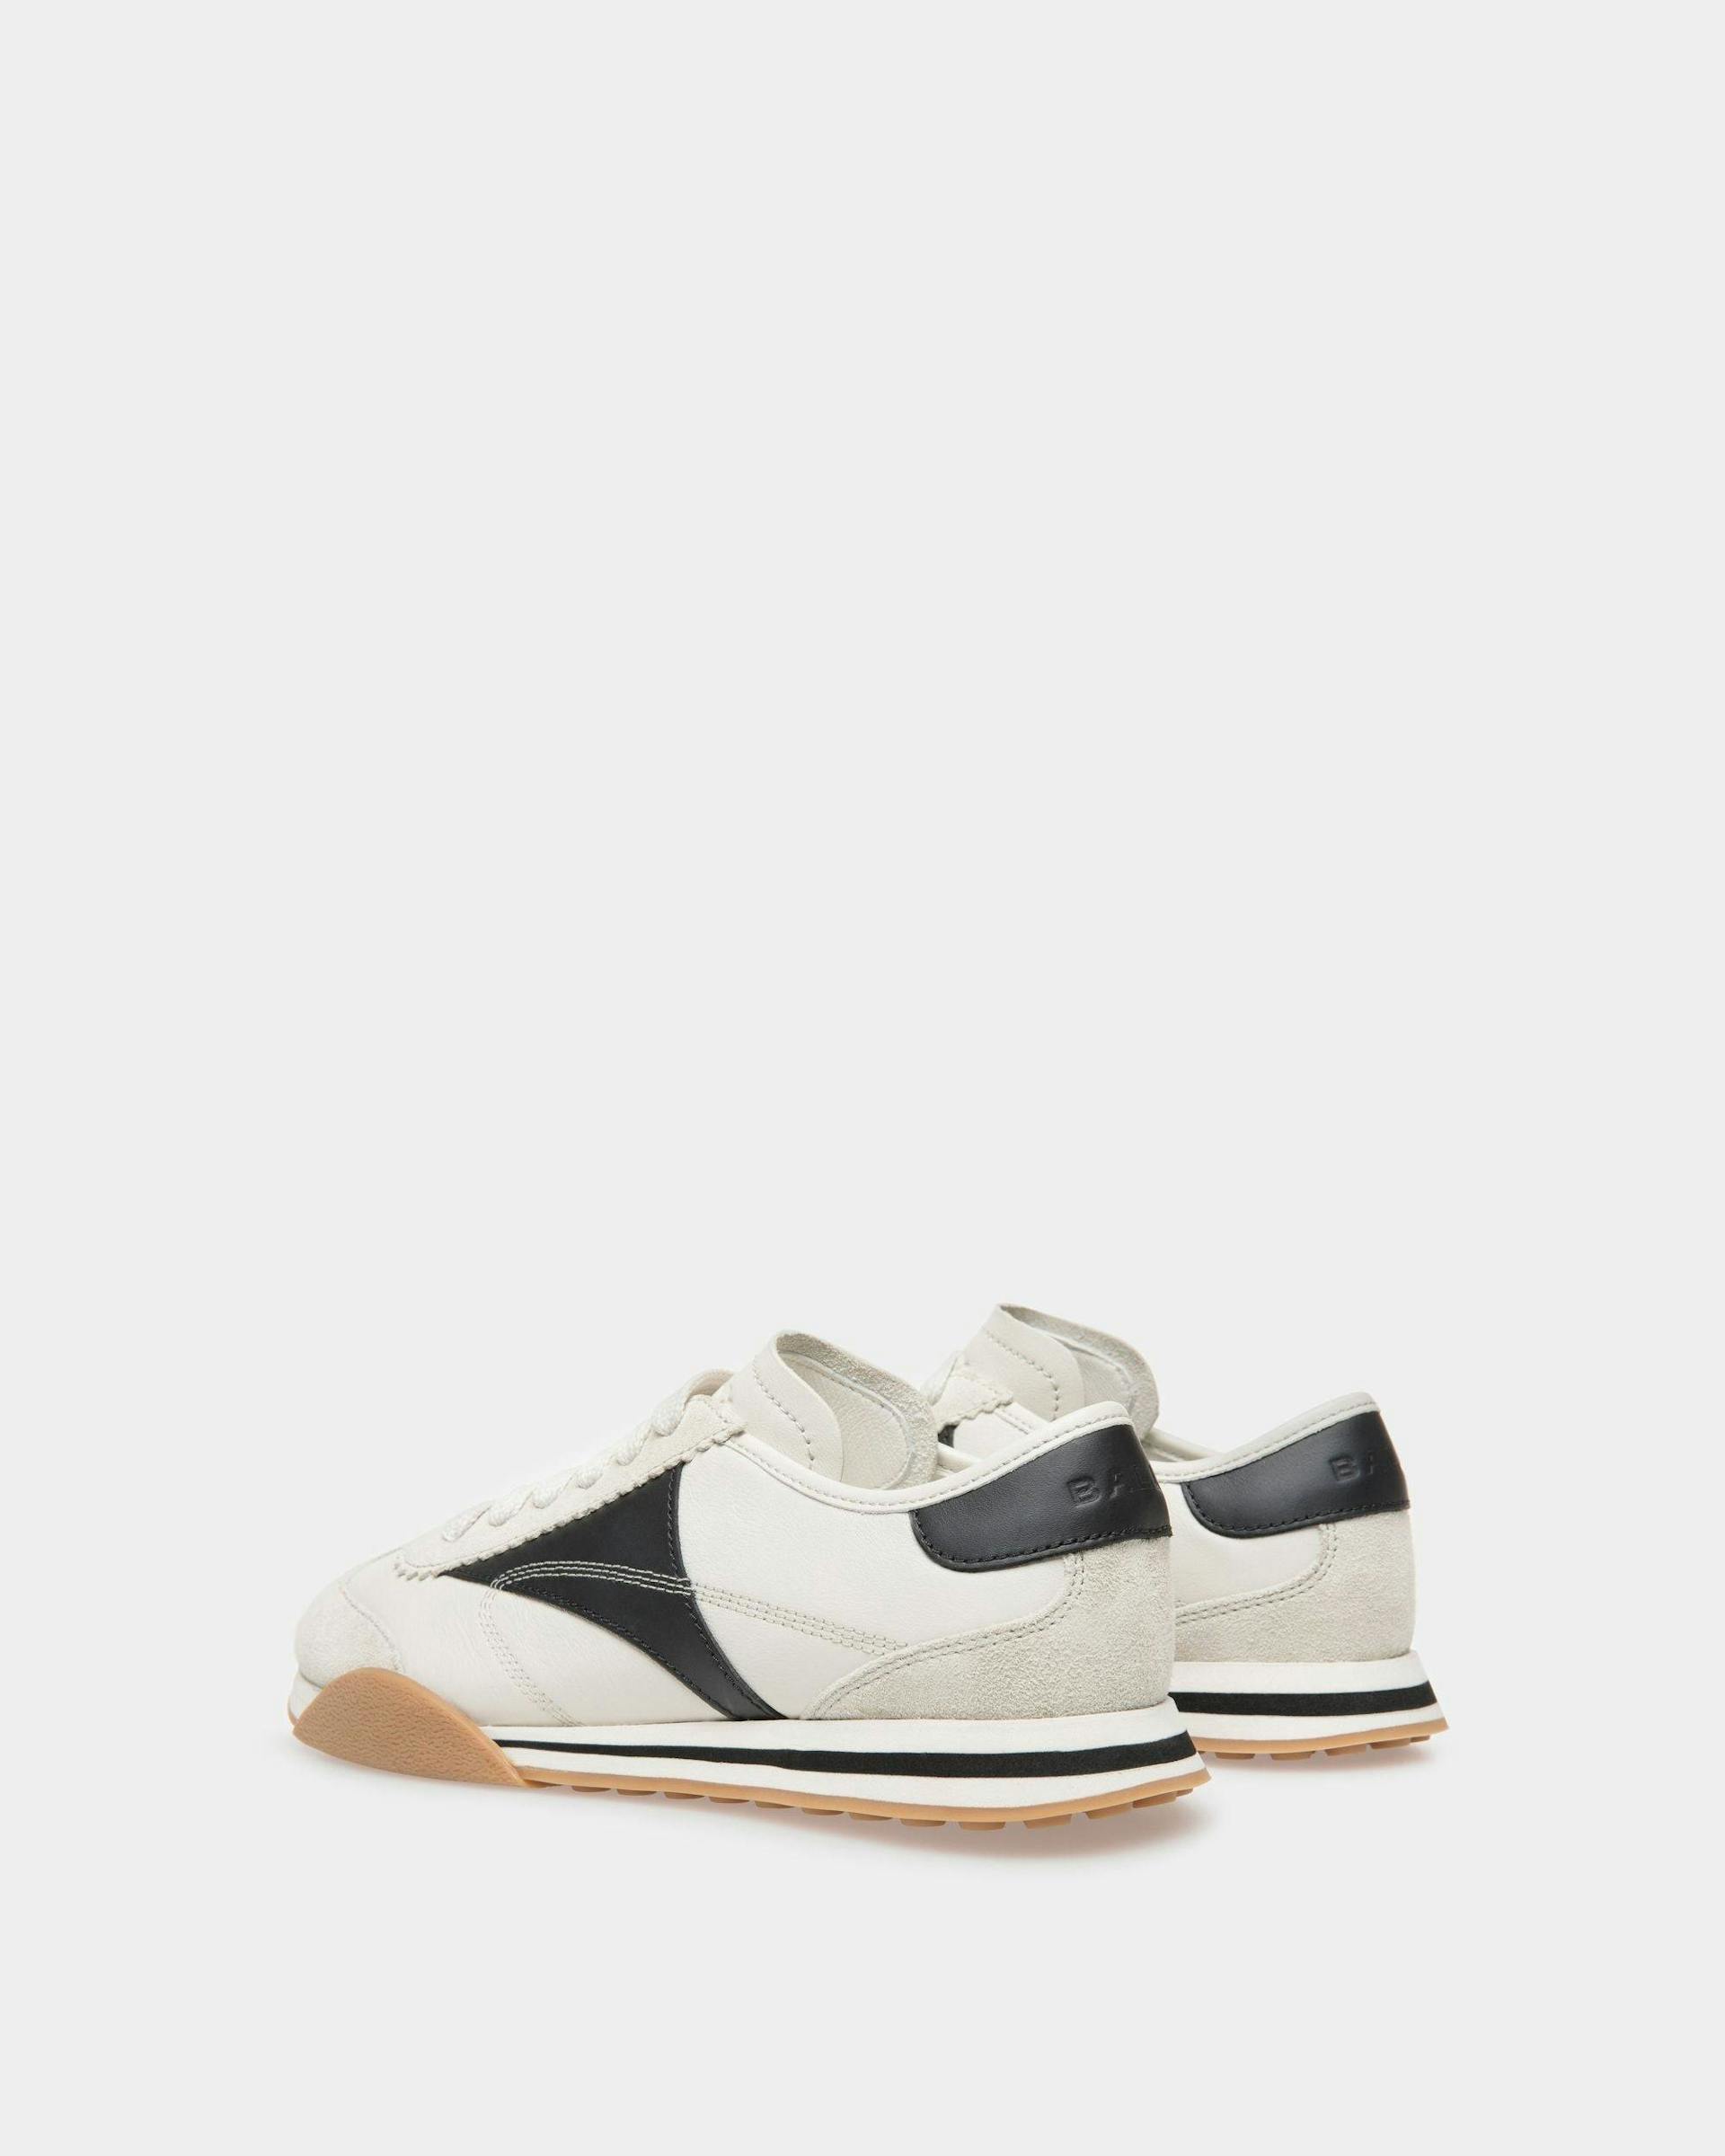 Men's Sussex Sneakers In Black And Dusty White Leather | Bally | Still Life 3/4 Back